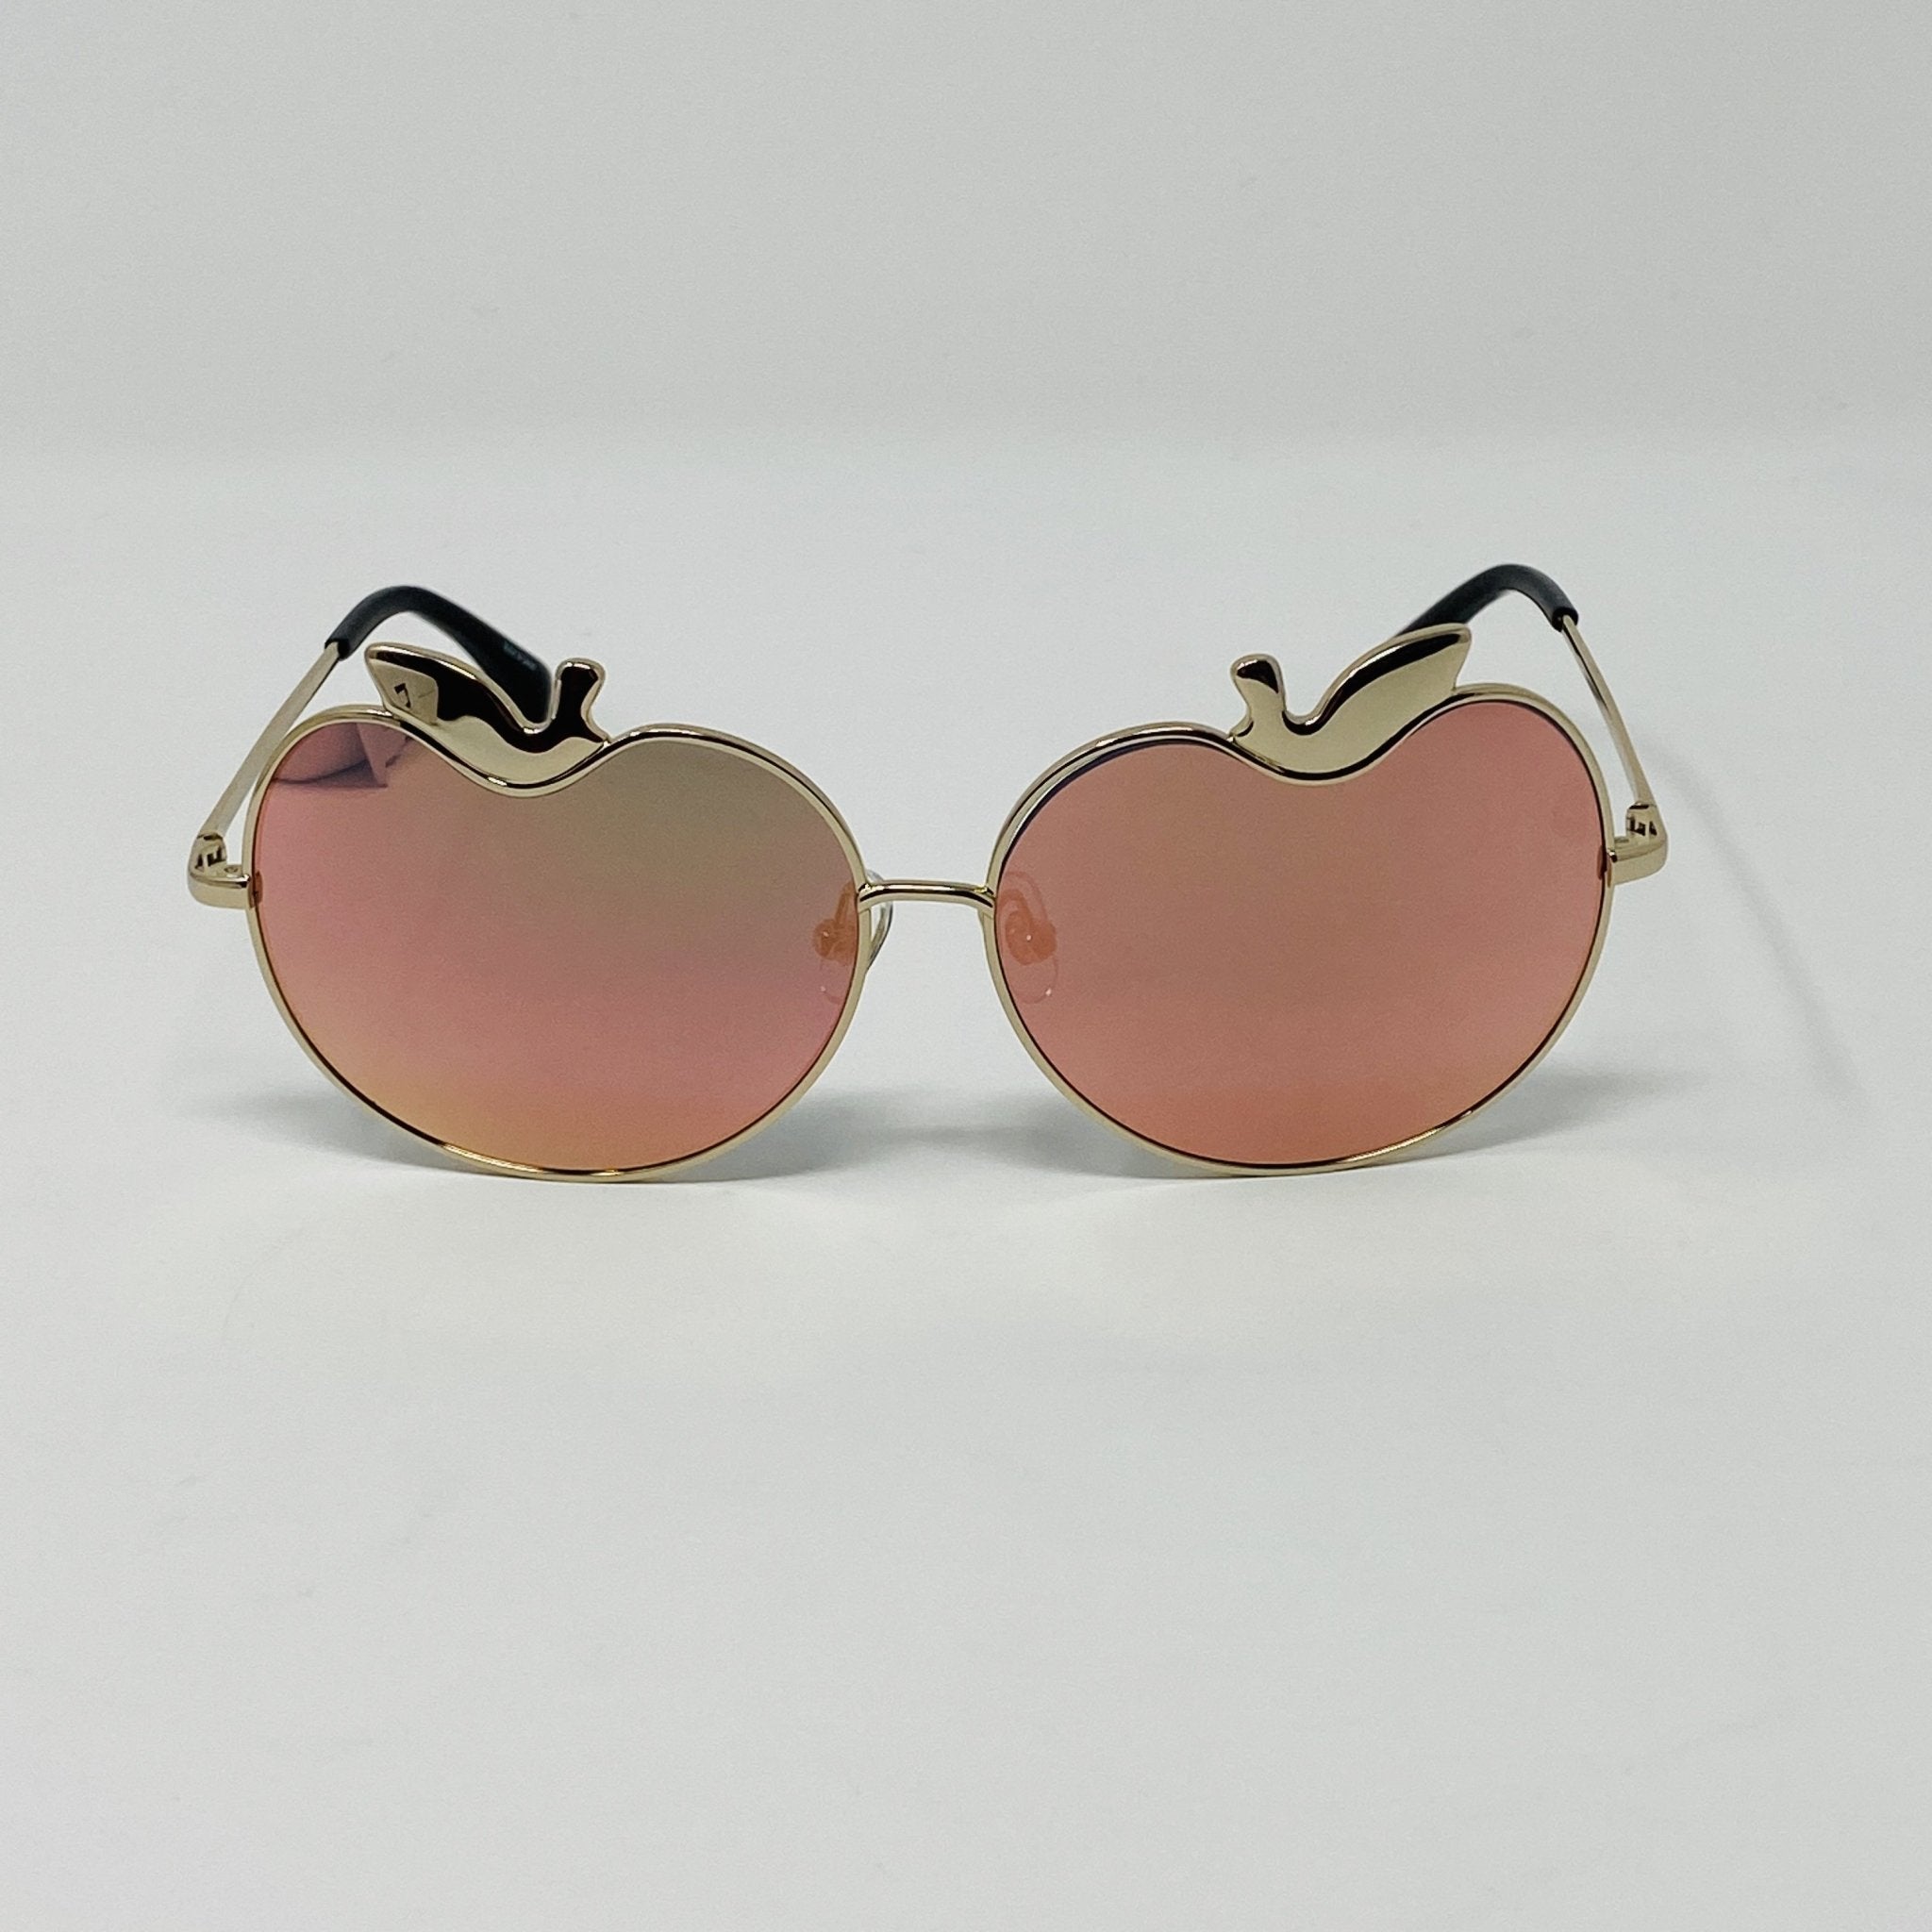 Markus Lupfer Sunglasses Special Apples Gold Mirror Lenses Category 3 Dark Tint ML12C7SUN - Watches & Crystals